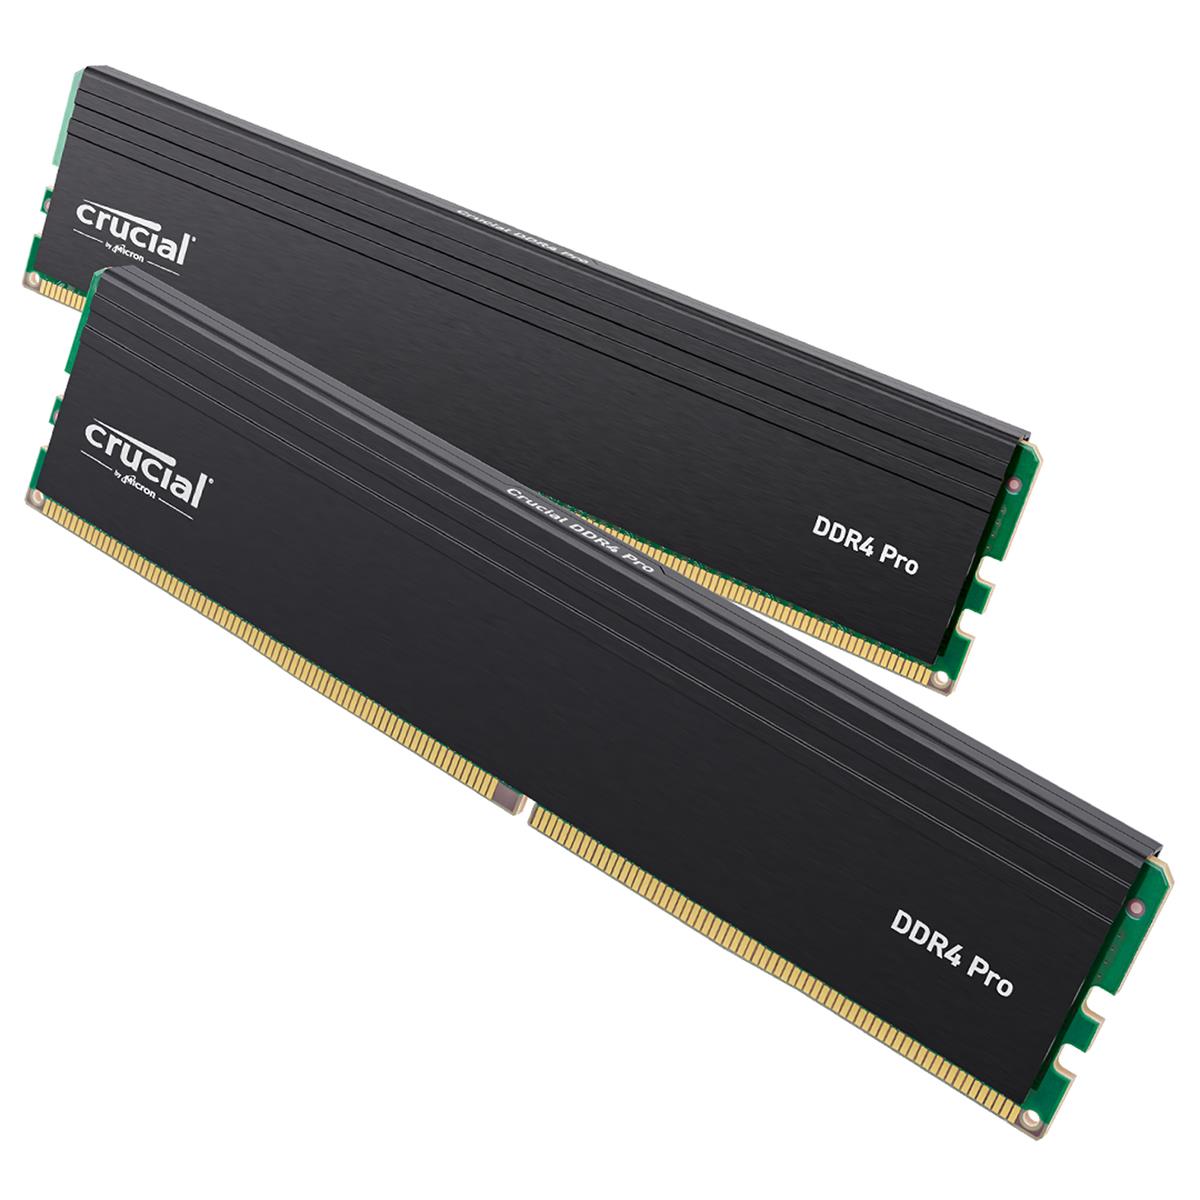 Image of Crucial Pro 32GB (2x16GB) DDR4 3200MHz CL22 UDIMM Desktop Memory Module